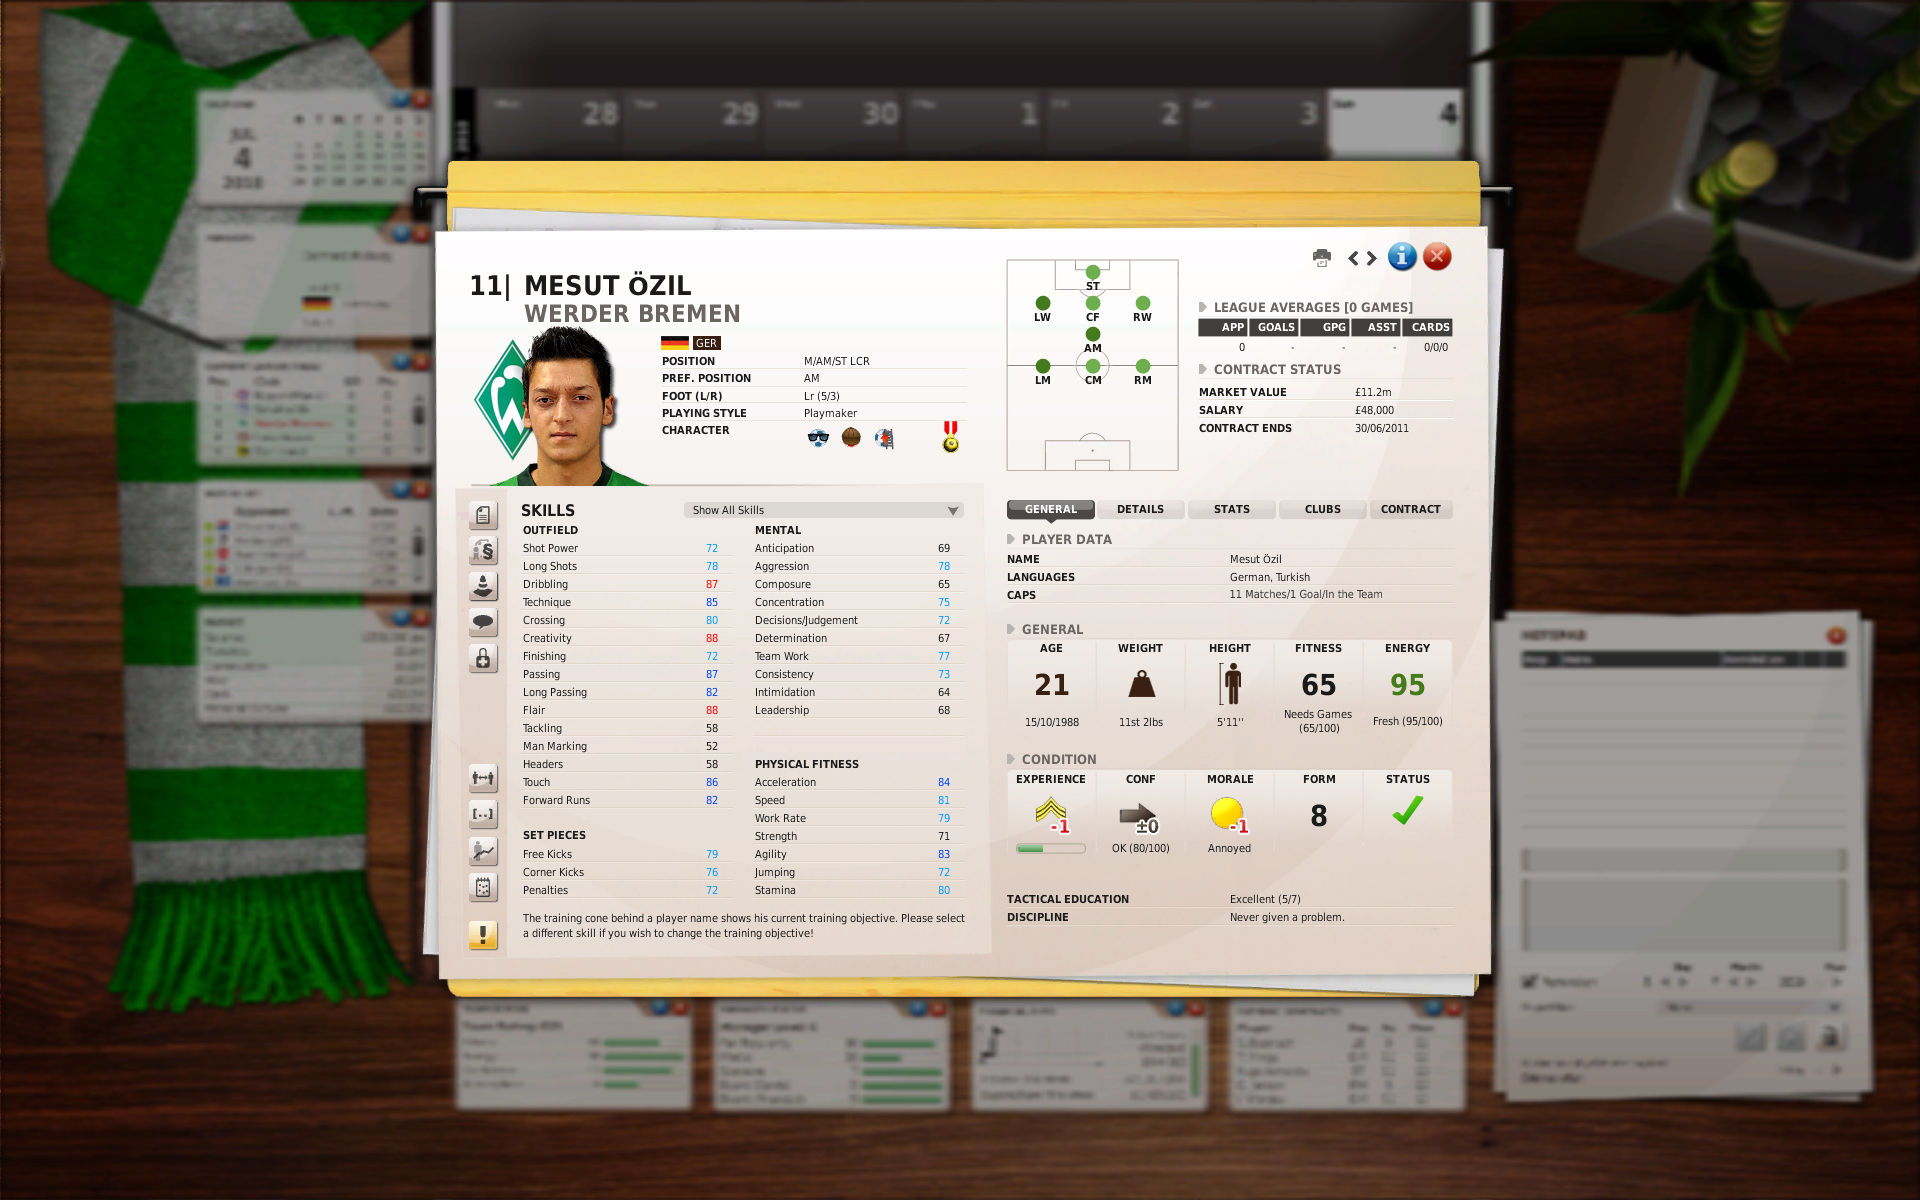 fifa_manager_11_9